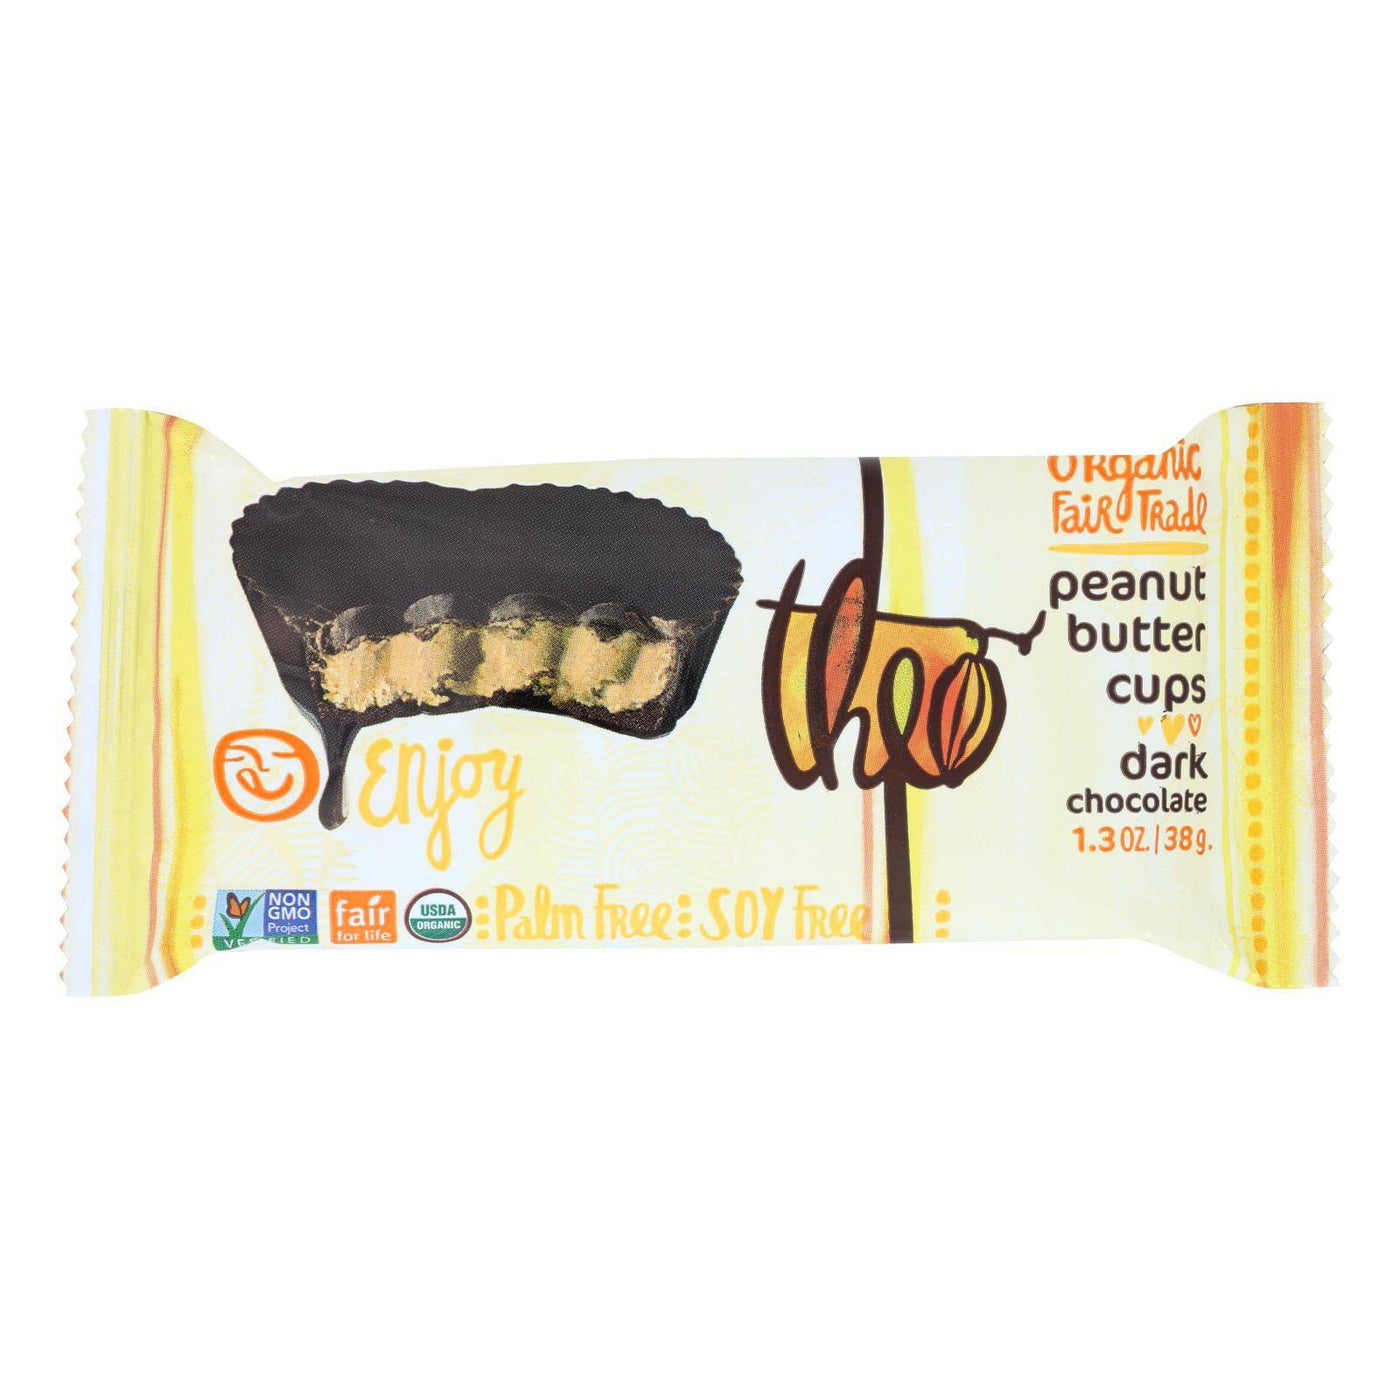 Buy Theo Chocolate Peanut Butter Cups - Dark Chocolate - 1.3 Oz - Case Of 12  at OnlyNaturals.us